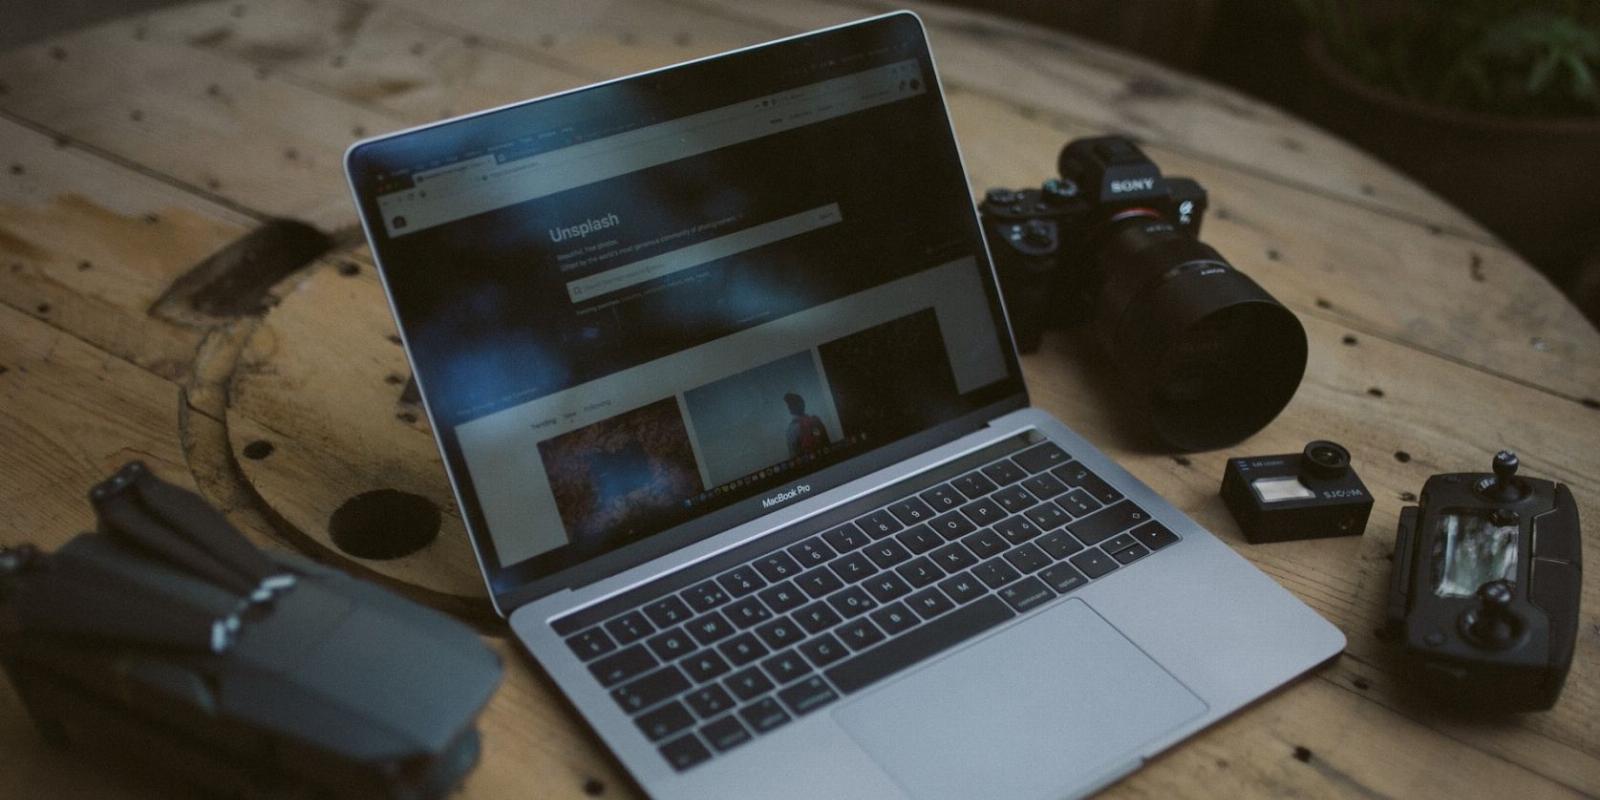 4 Ways to View an Image’s EXIF Metadata on a Mac